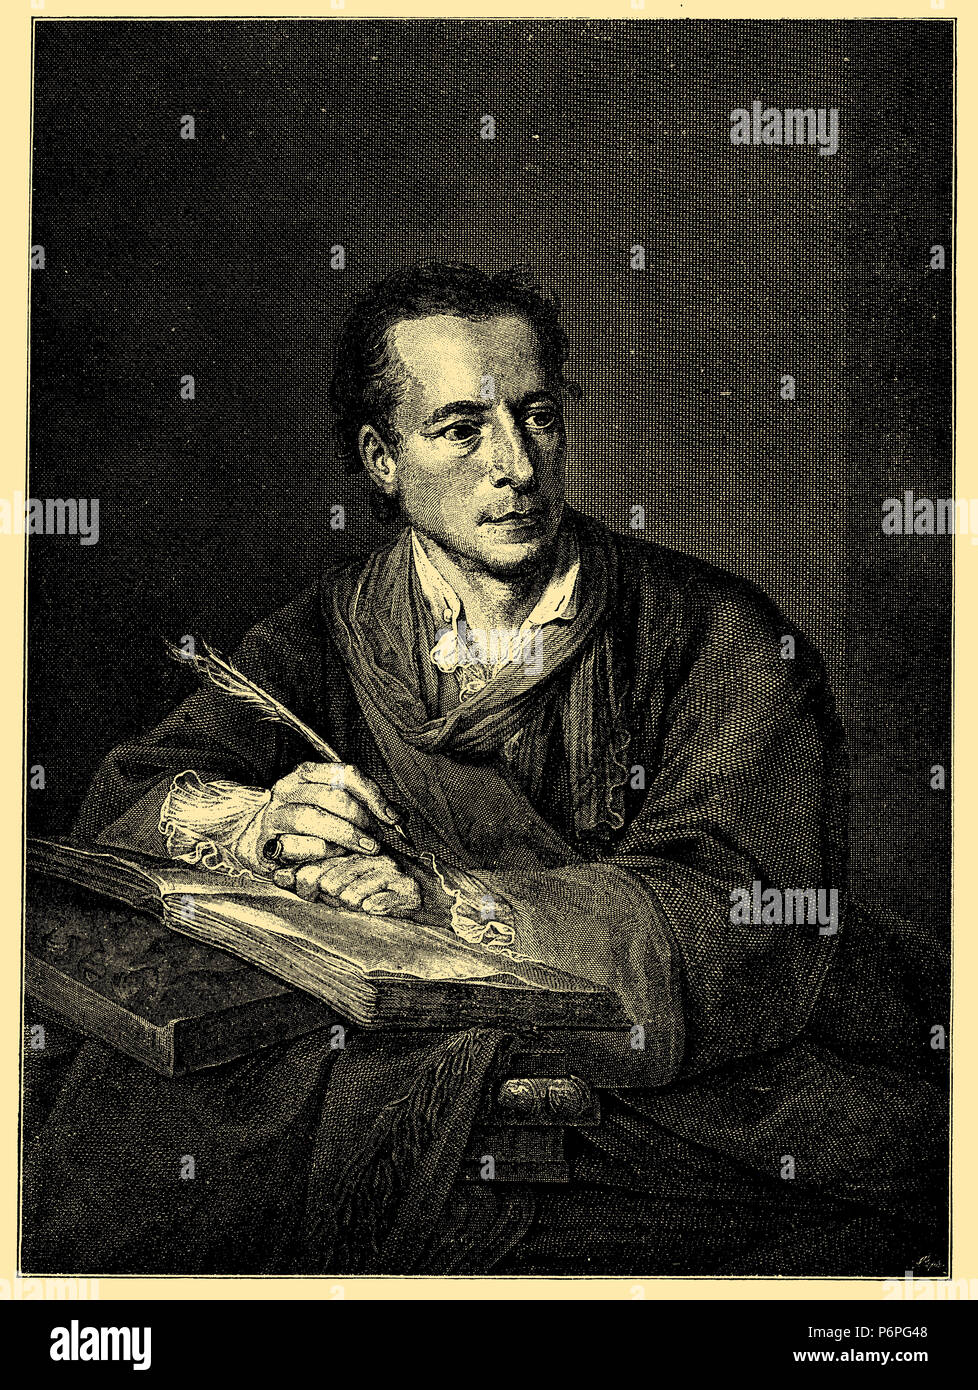 Johann Joachim Winckelmann (1717-1768), German archaeologist, librarian, antiquarian and art writer of the Enlightenment, in the 47th year of his life. After the painting by Angelika Kauffmann, engraved by Rudolf Rahn,   1910 Stock Photo